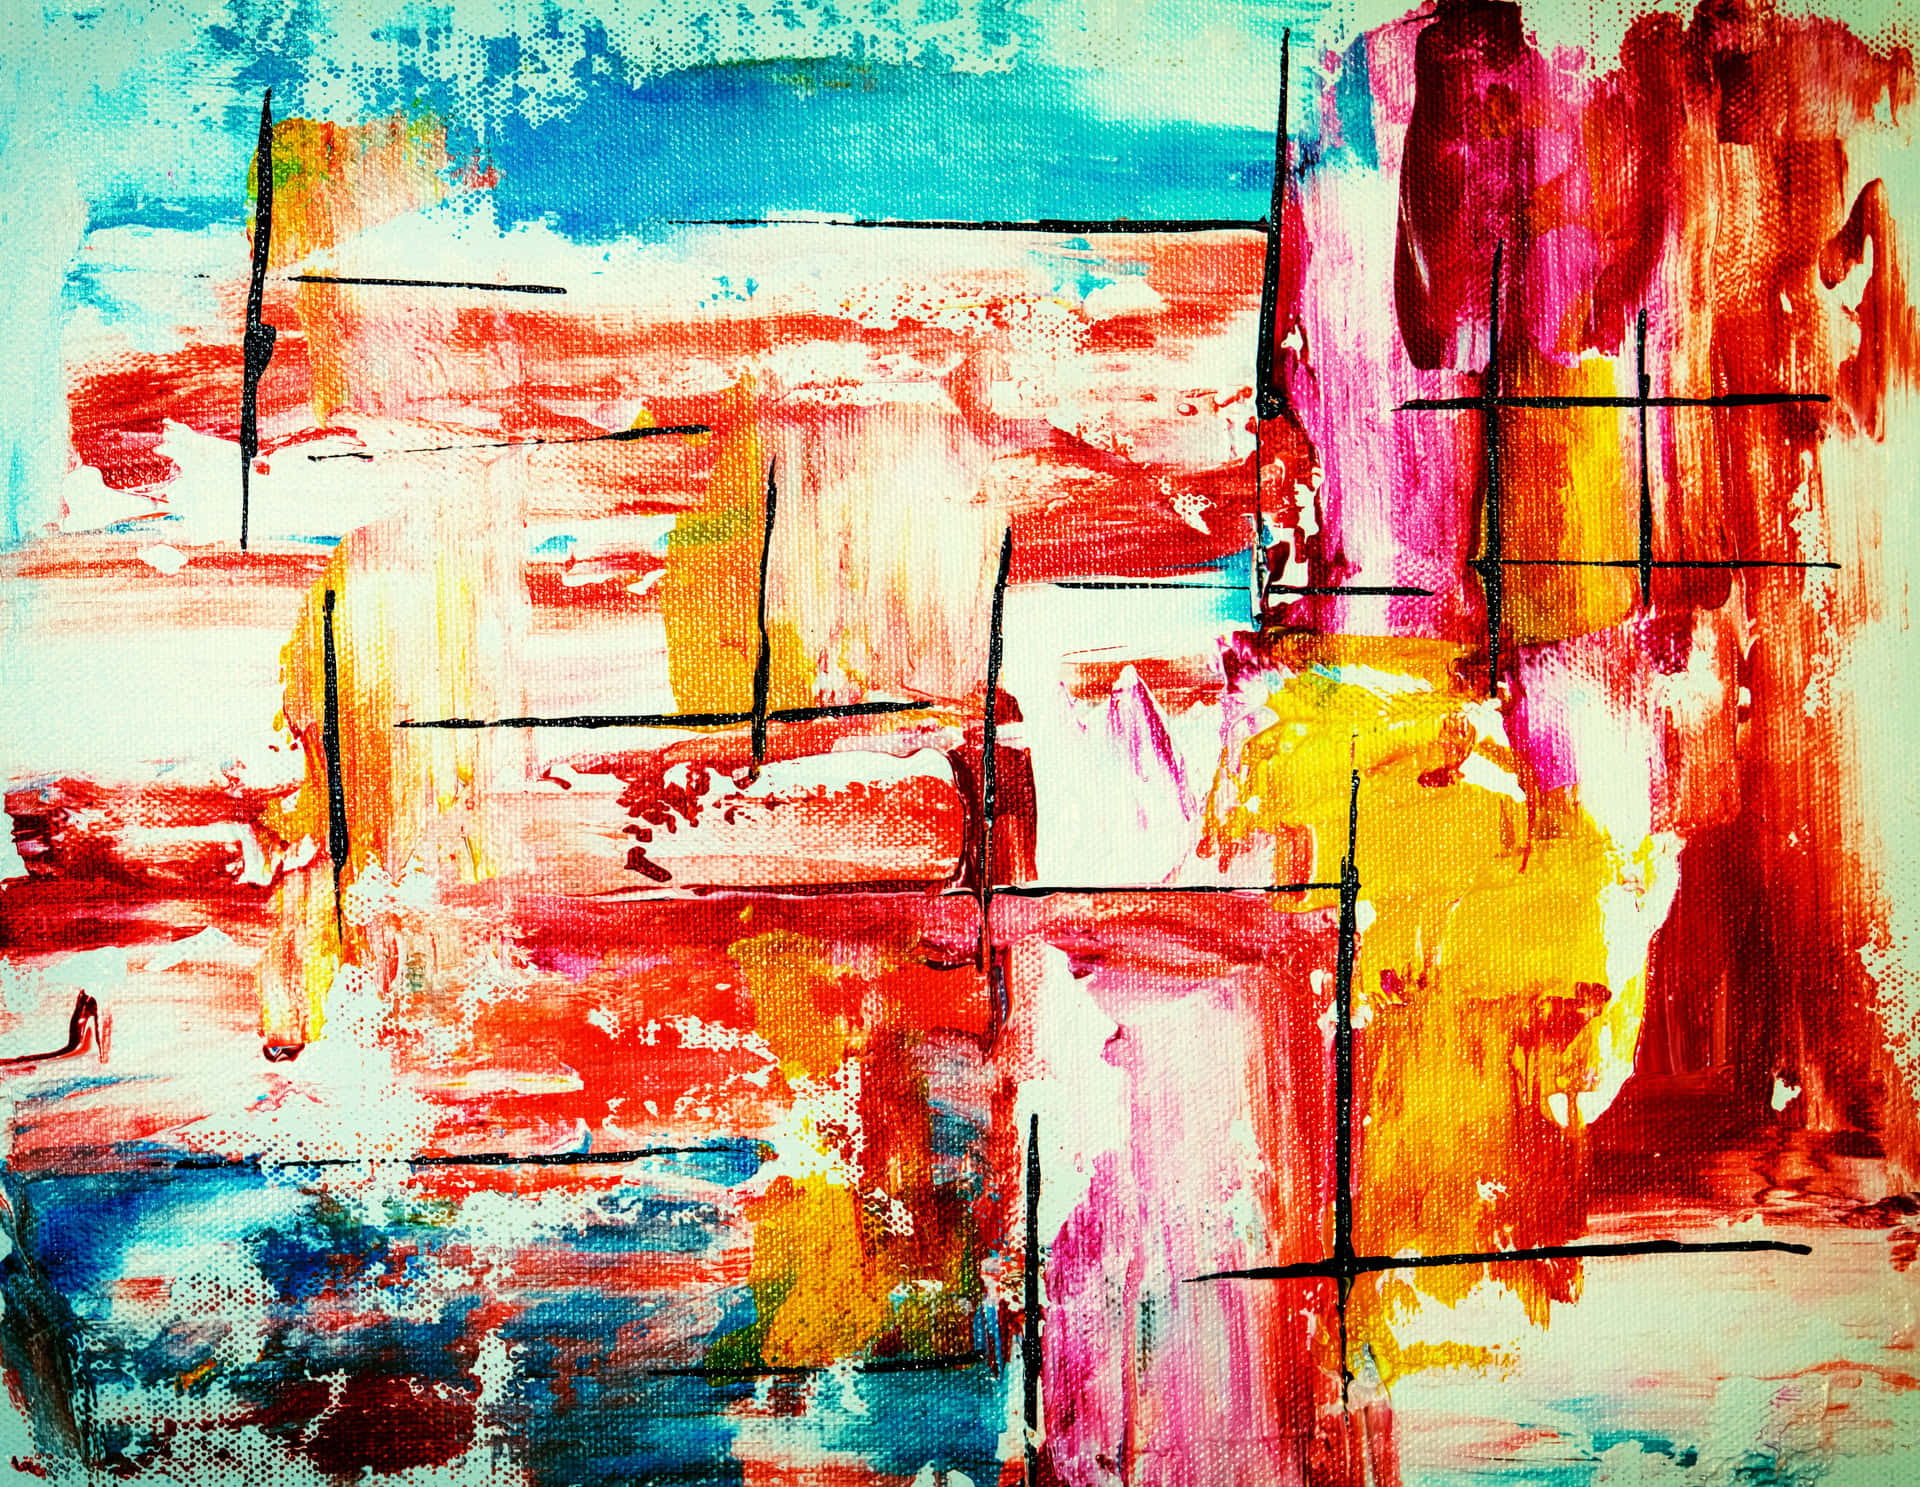 Colorful Abstract Expressionist Painting Wallpaper